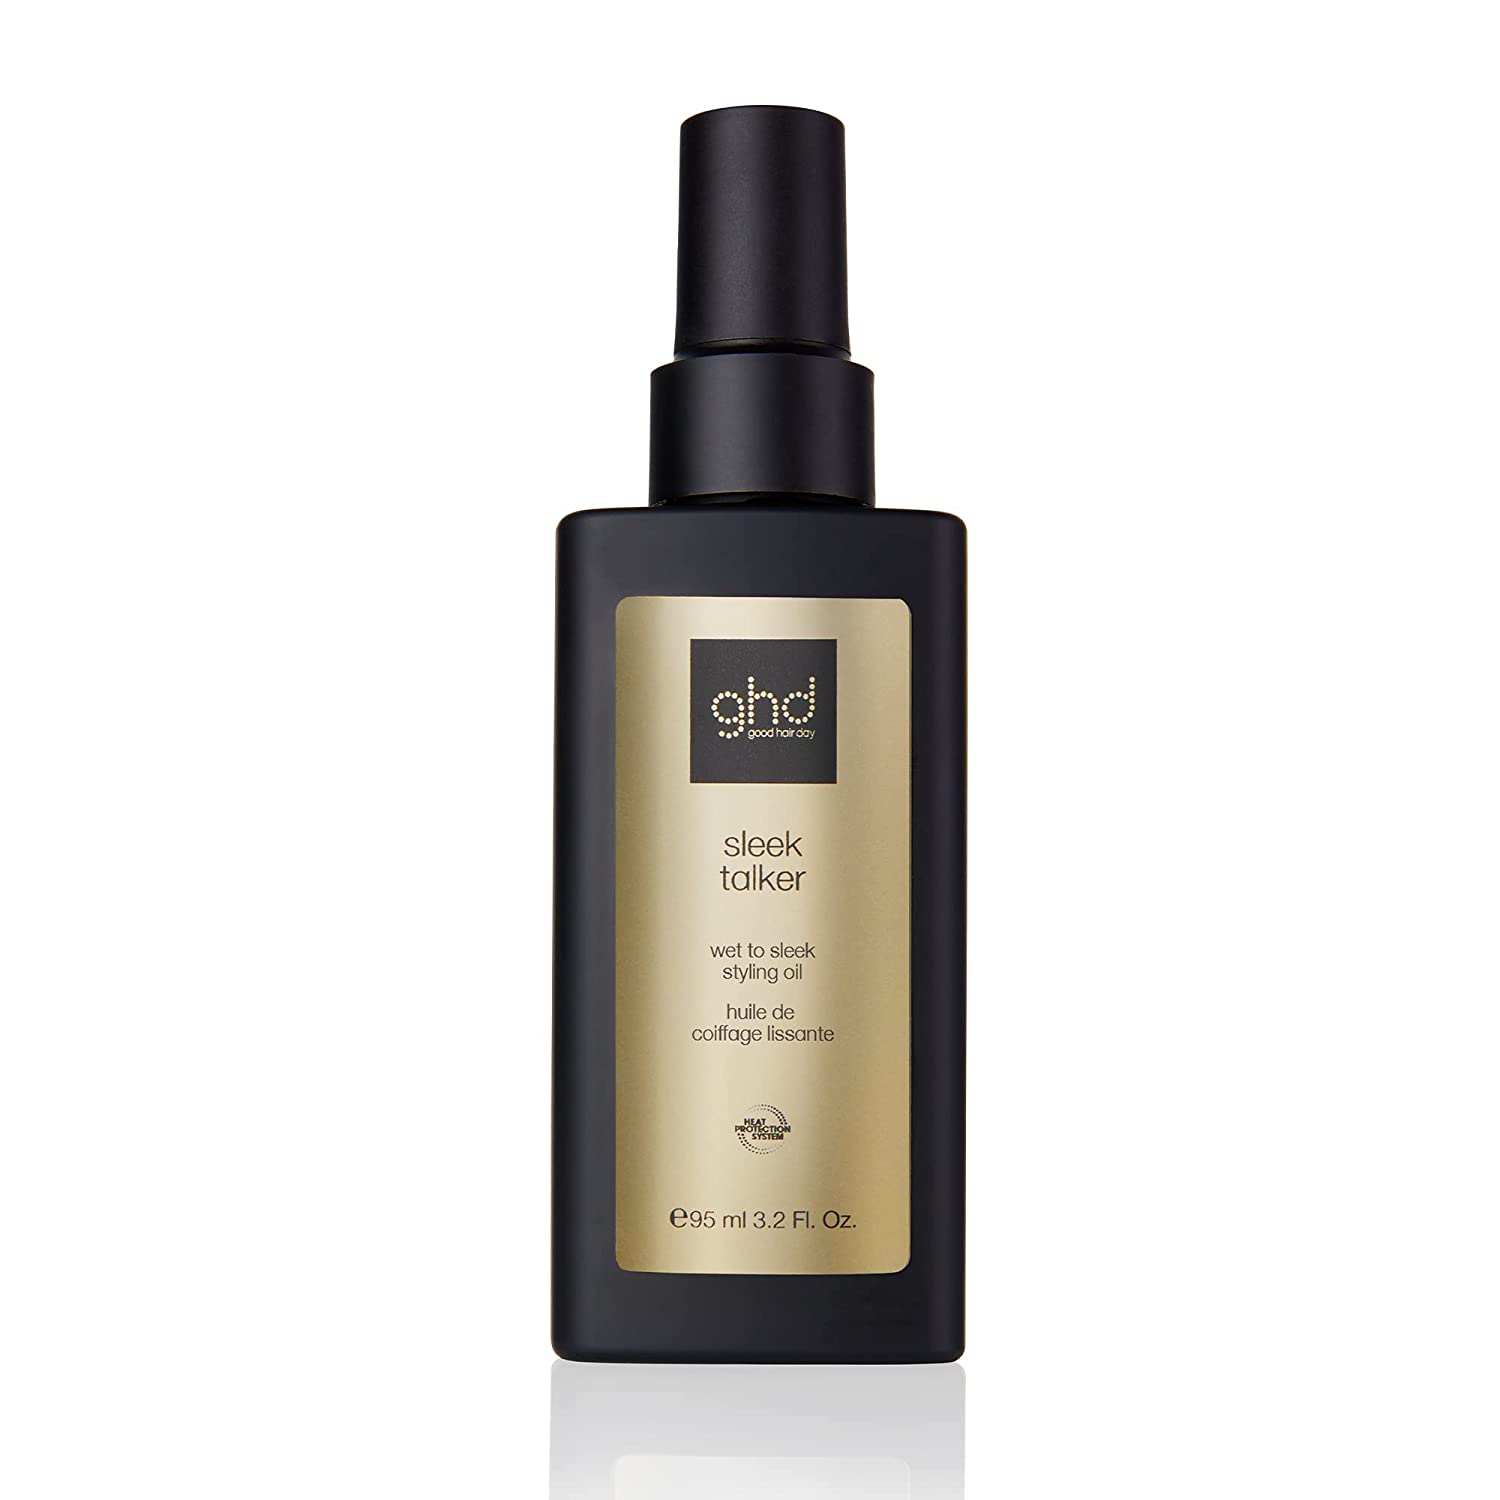 Ghd Sleek Talker Wet to Sleek Styling Oil with Heat Protection, Nourishing Argan Oil that keeps hair smooth and supple for up to 72 hours